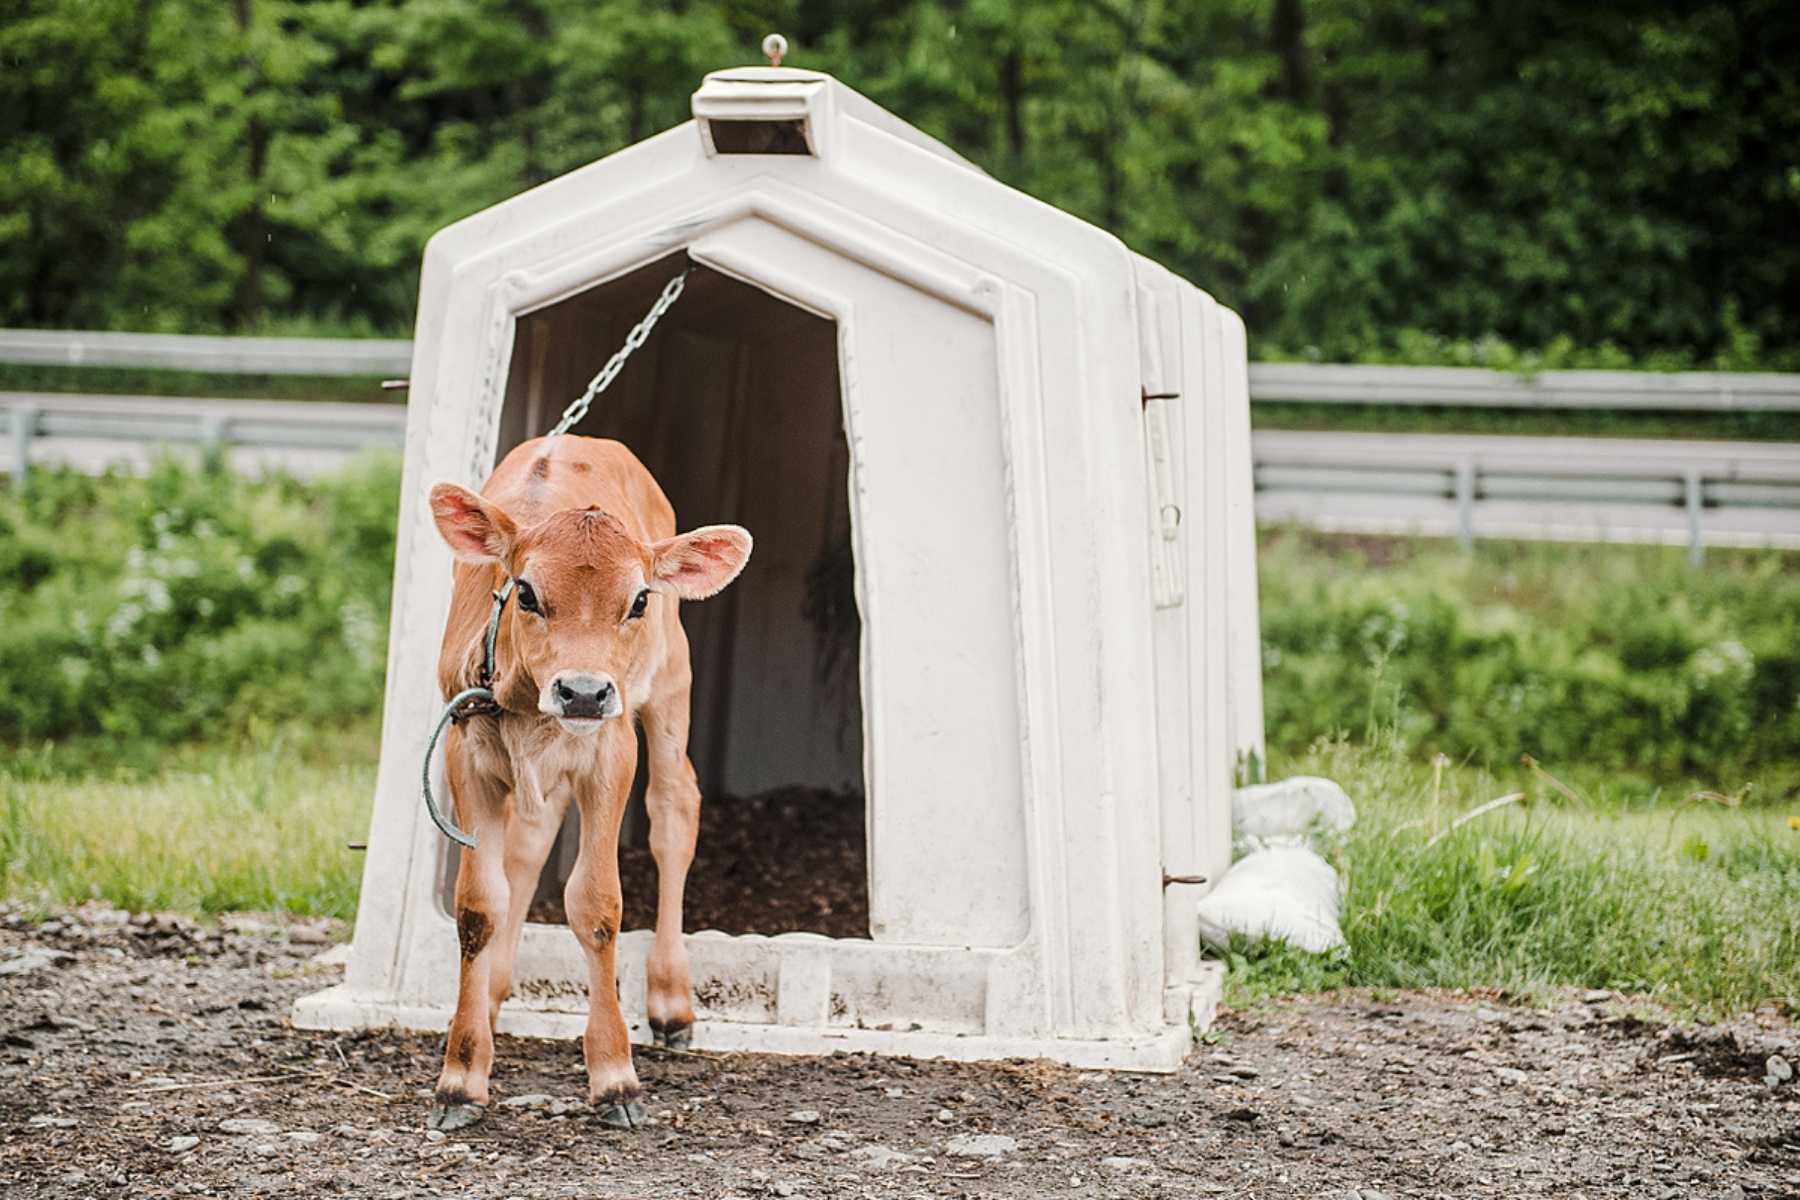 An emaciated heifer chained to a plastic hutch on the side of a road at a small, family-run dairy farm in Vermont. The calf is less than a month old and has already been separated from her mother.